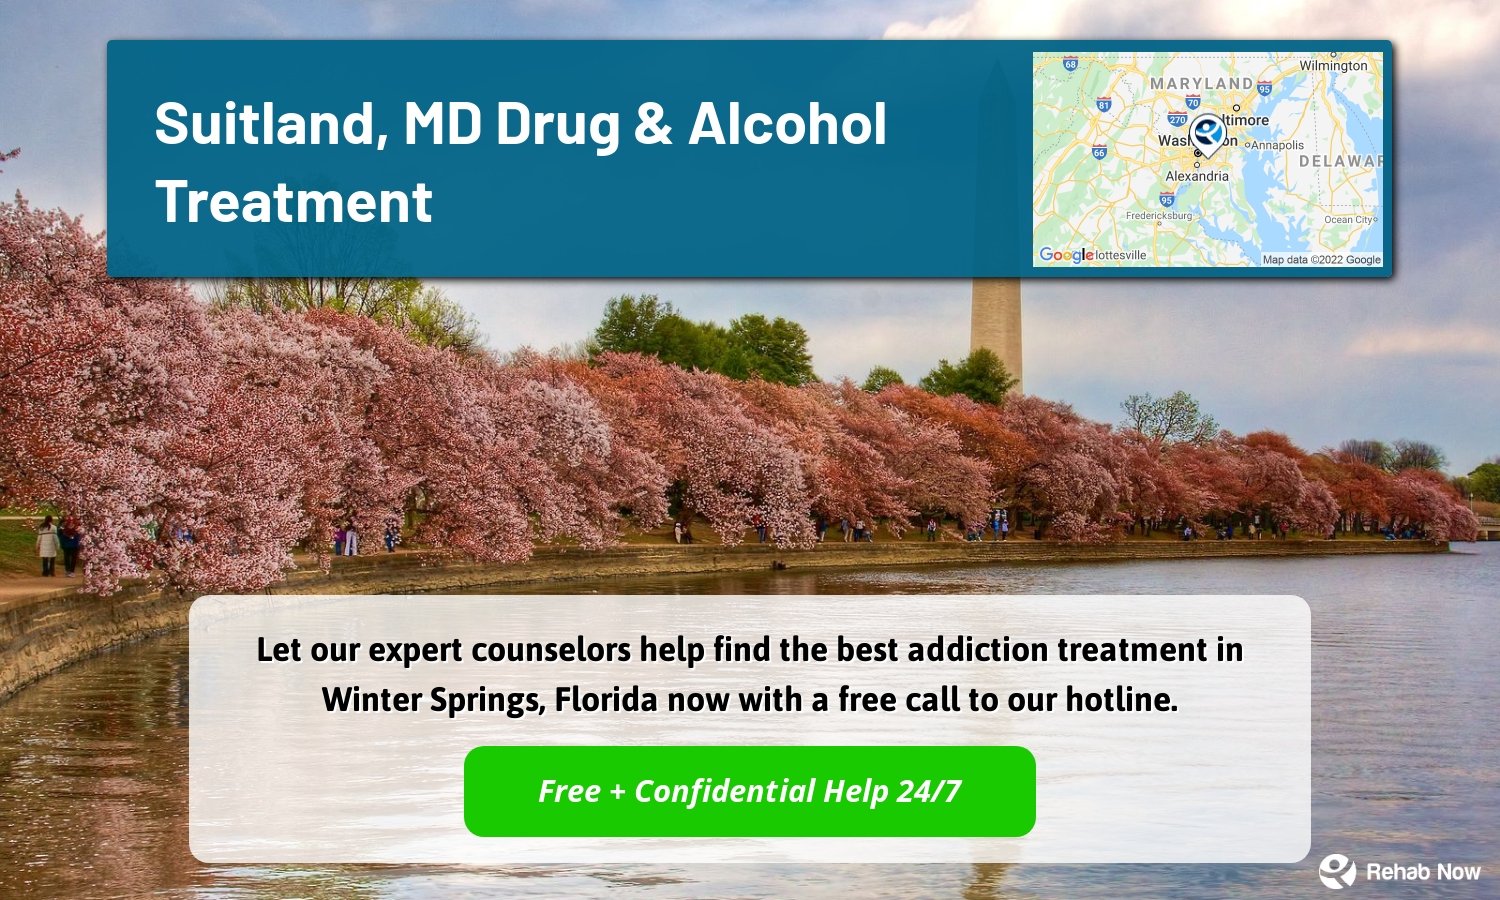 Let our expert counselors help find the best addiction treatment in Winter Springs, Florida now with a free call to our hotline.